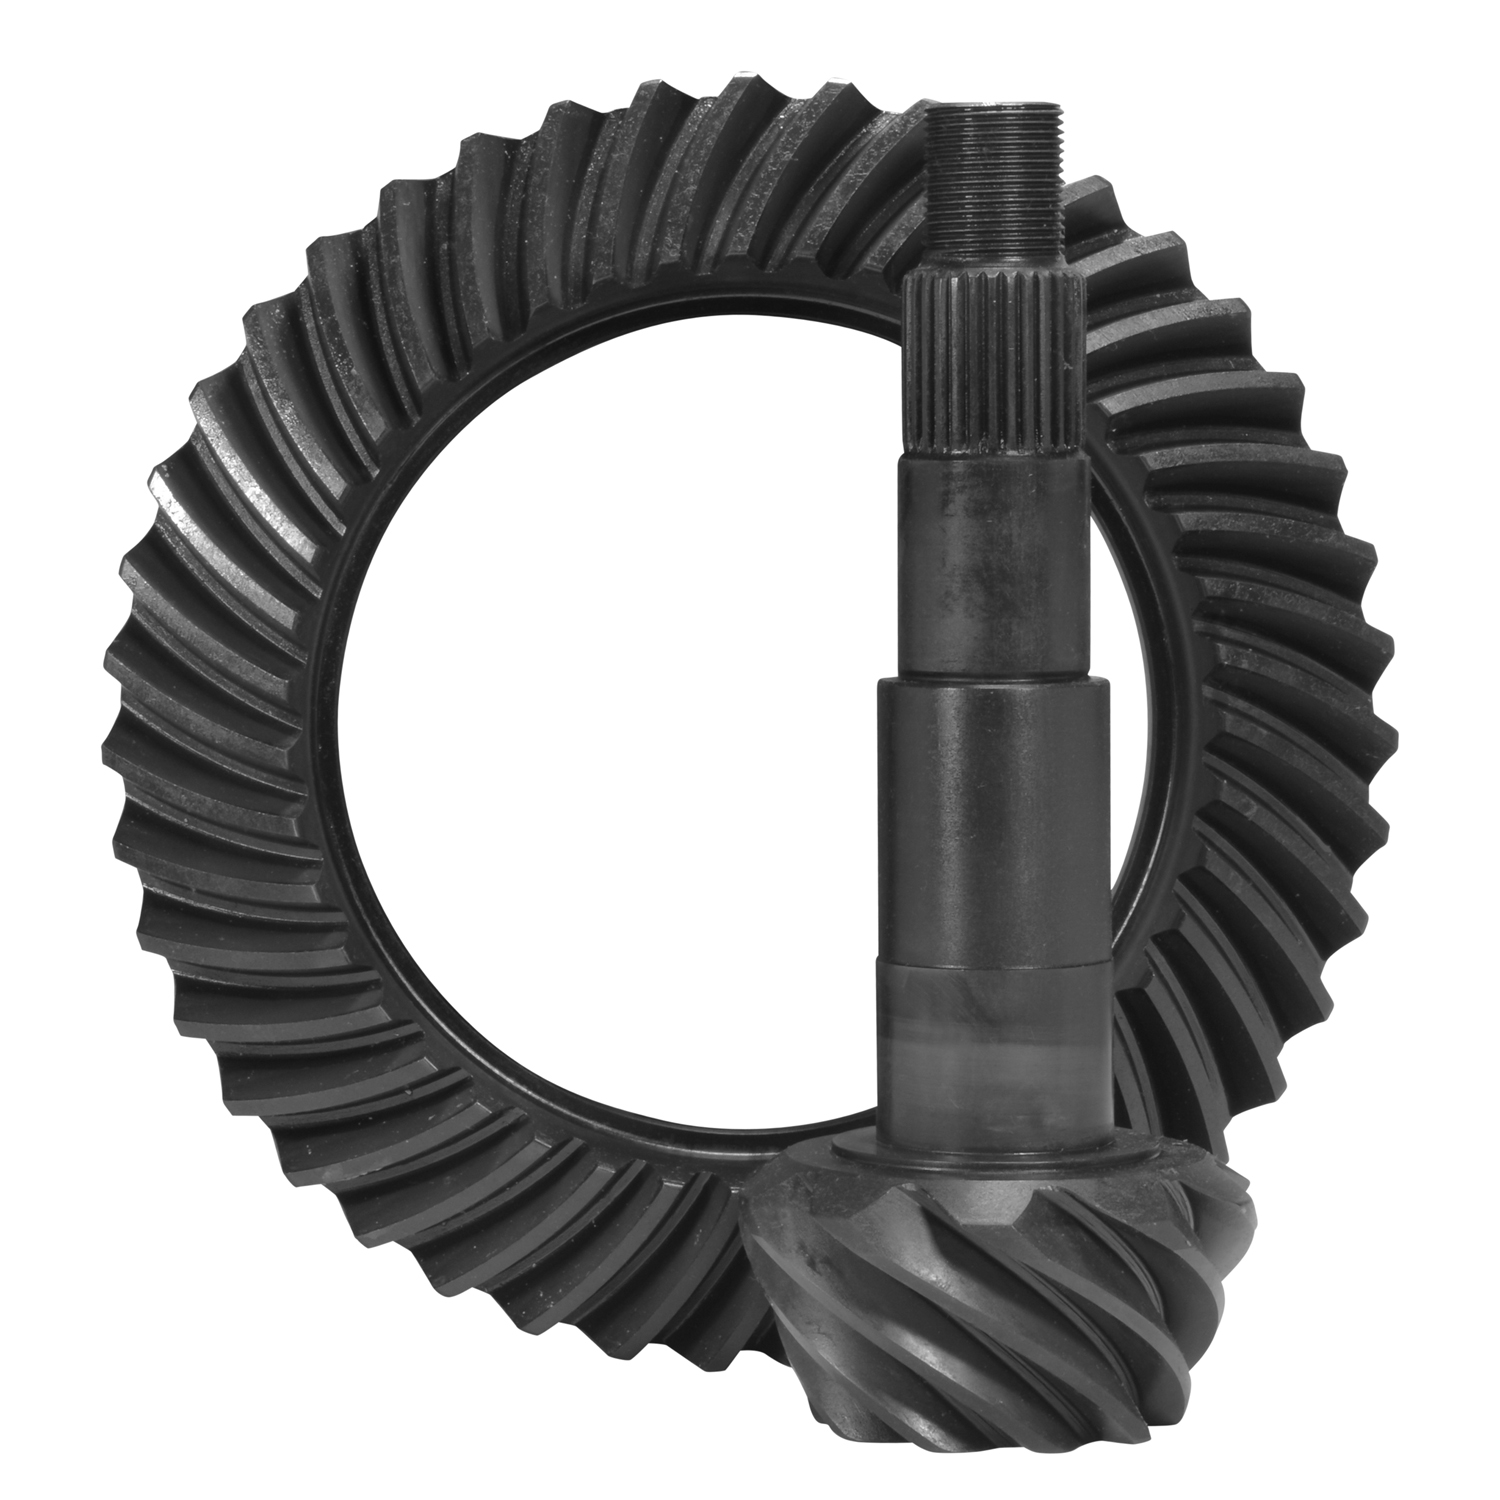 USA Standard Ring & Pinion gear set for GM & Chrysler 11.5" Rear in a 4.30 ratio